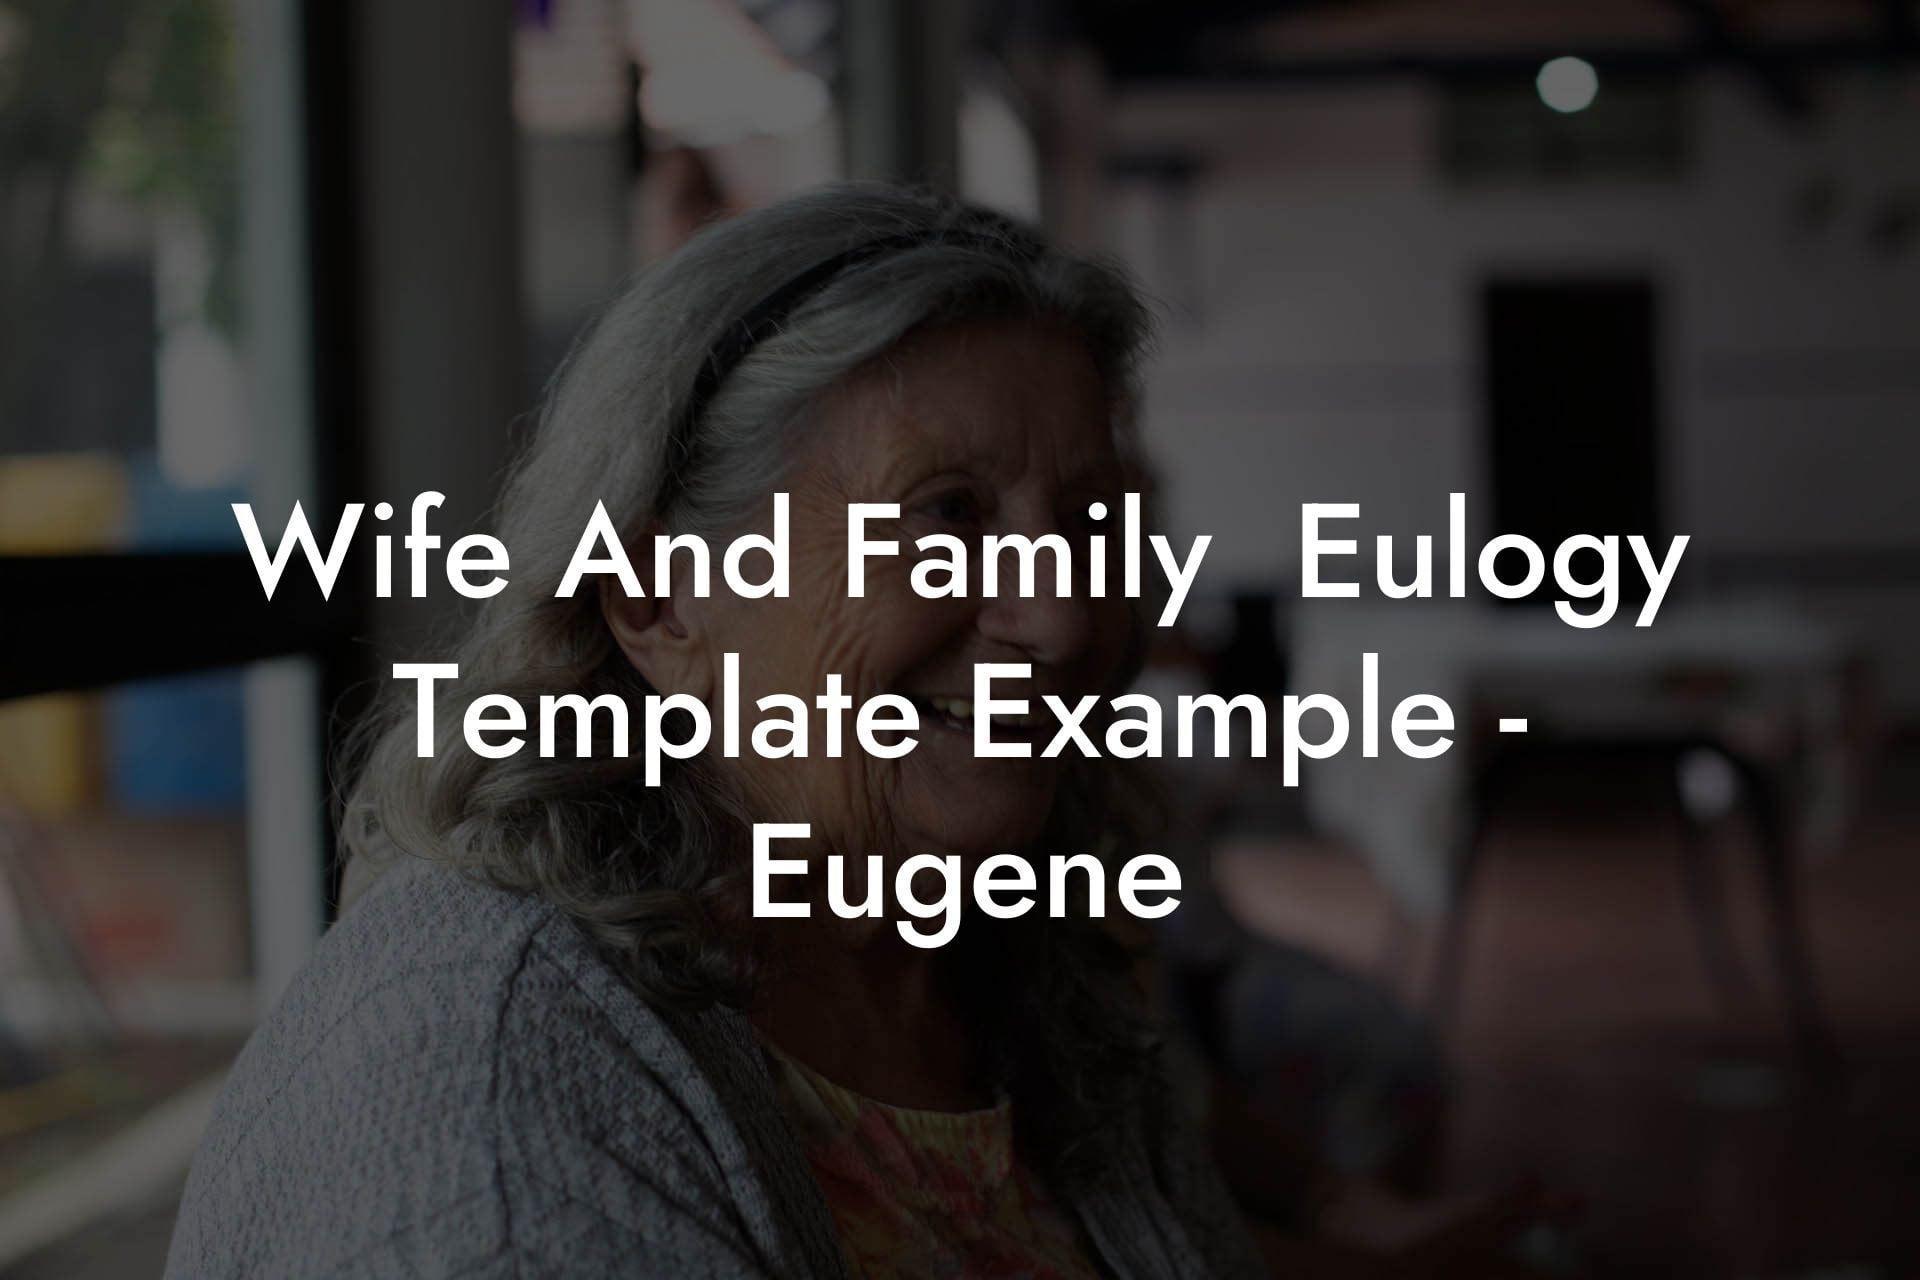 Wife And Family  Eulogy Template Example - Eugene